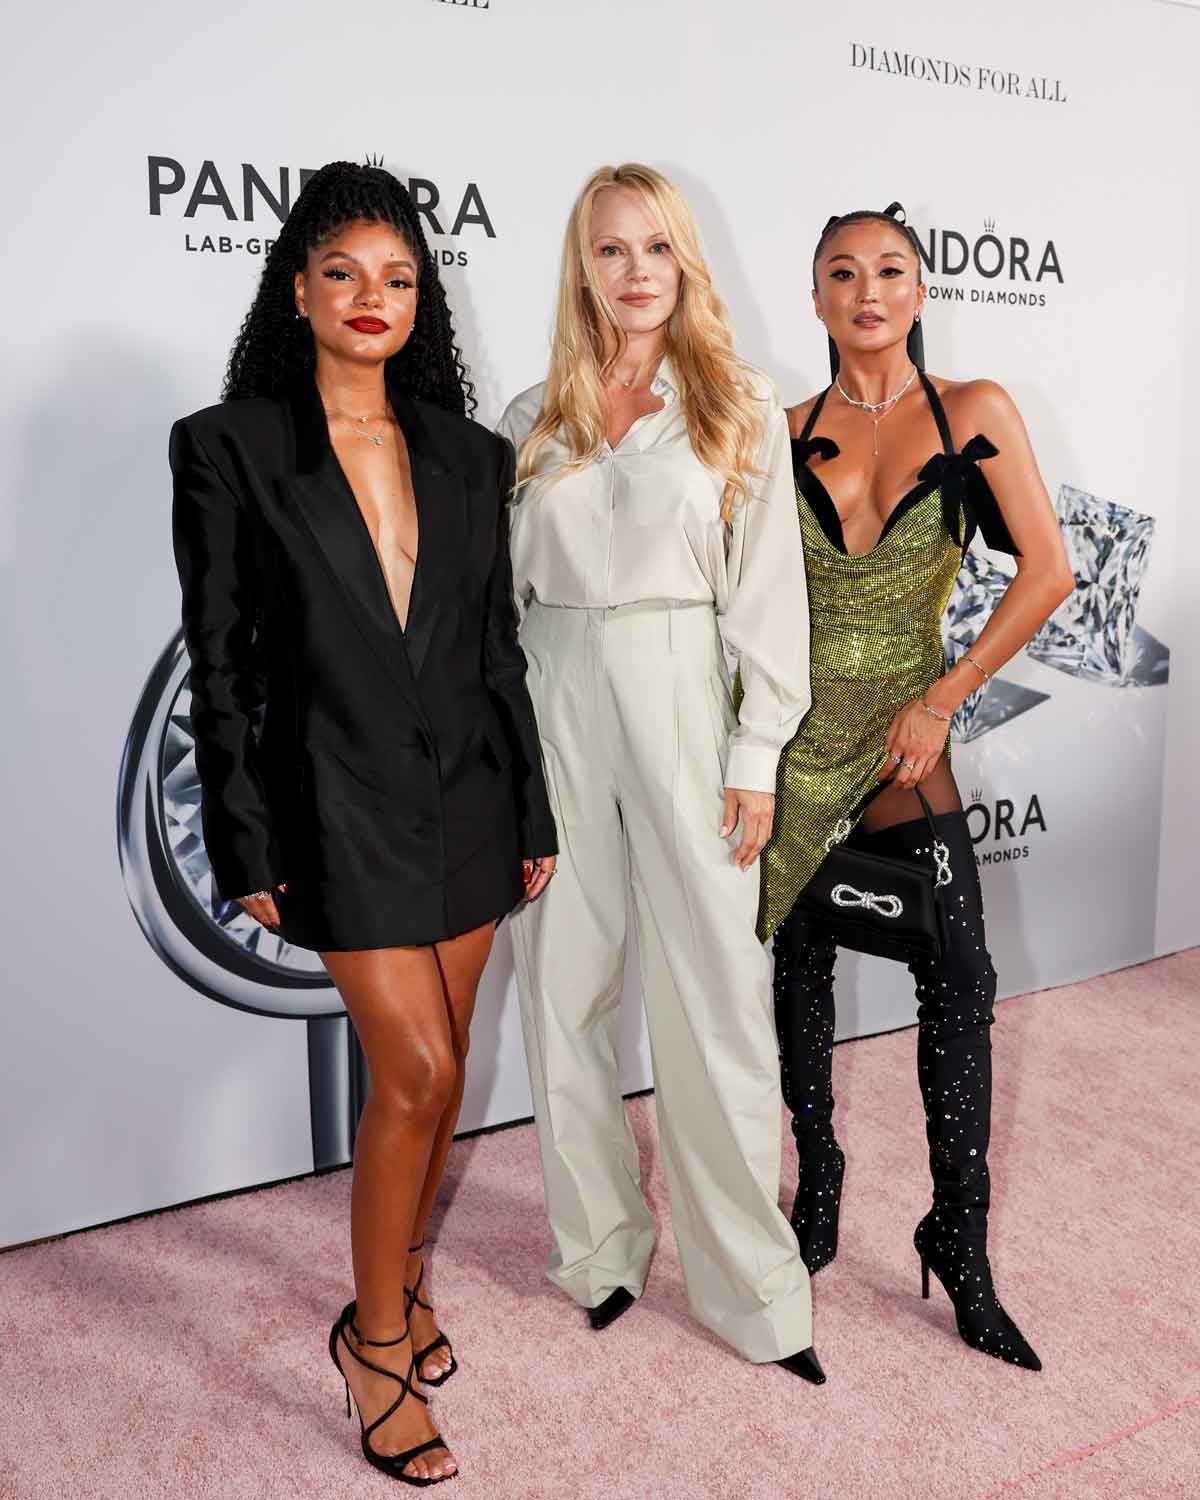 PANDORA'S 'NEW DIAMOND DISTRICT' CELEBRATED LAB-GROWN JEWELRY LINE DURING  NYFW WITH PAMELA ANDERSON, HALLE BAILEY, ASHLEY PARK AND MORE